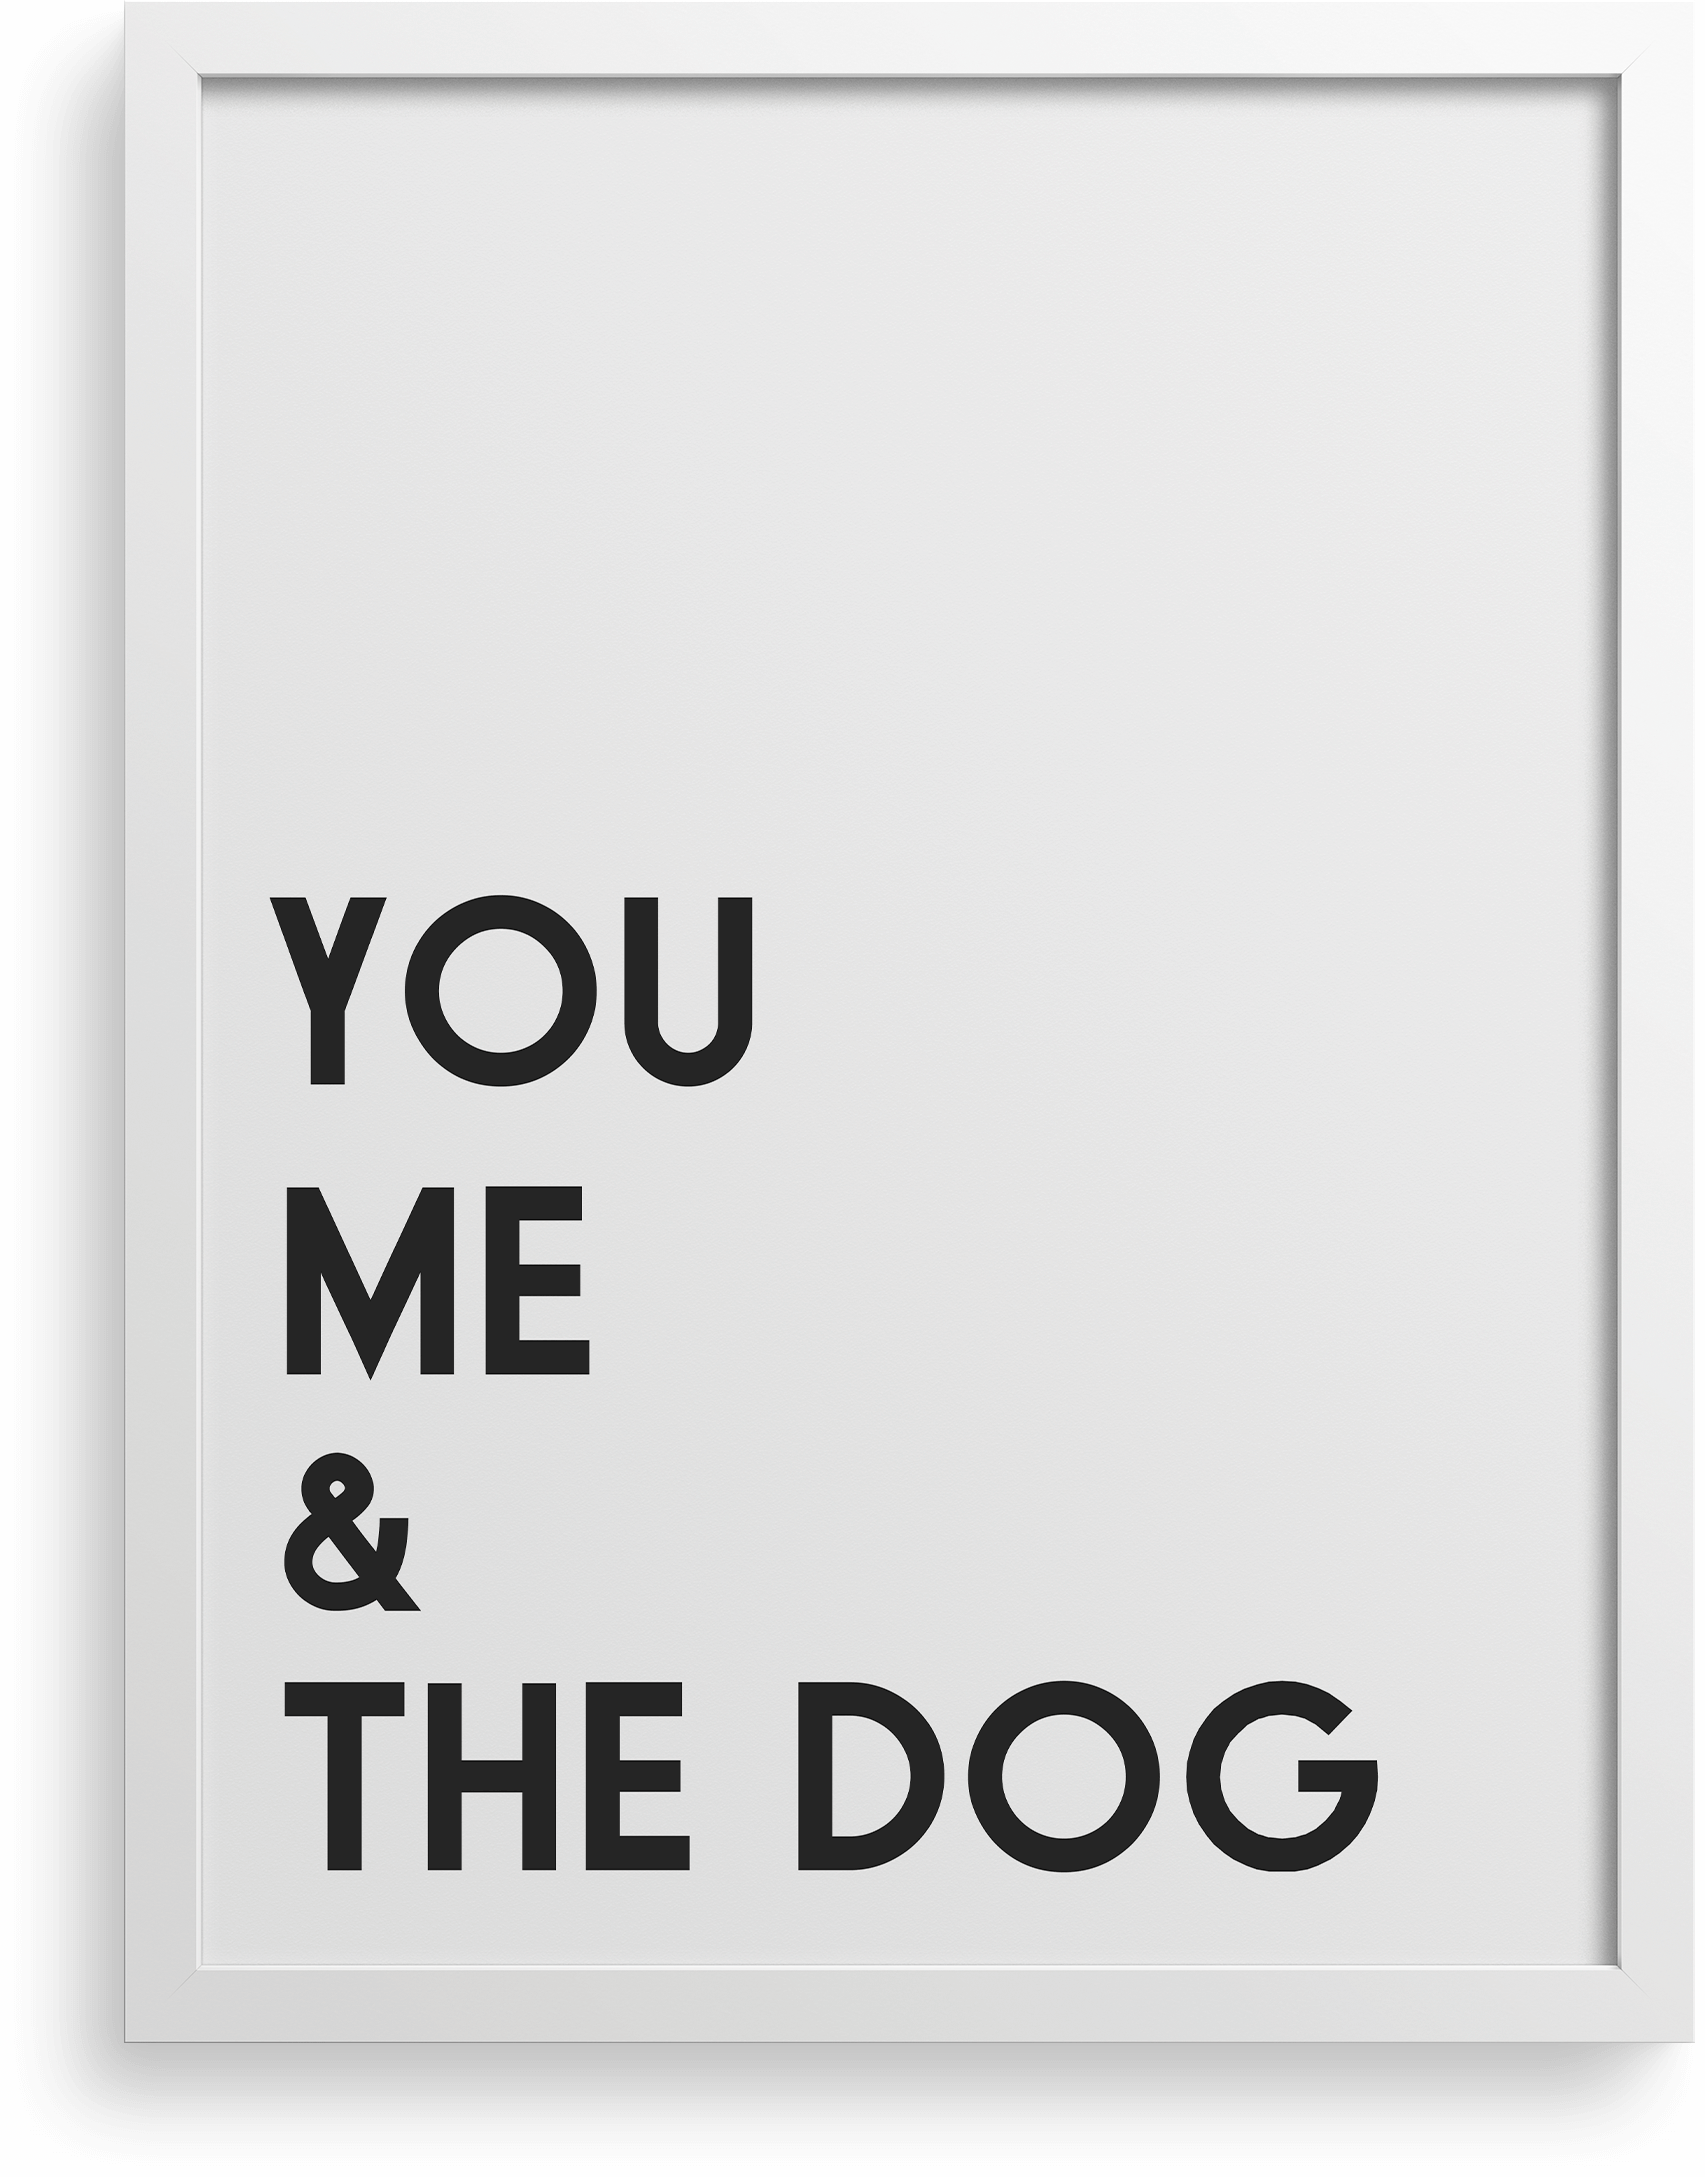 youmedog-white_whiteframe.png?crop=cente